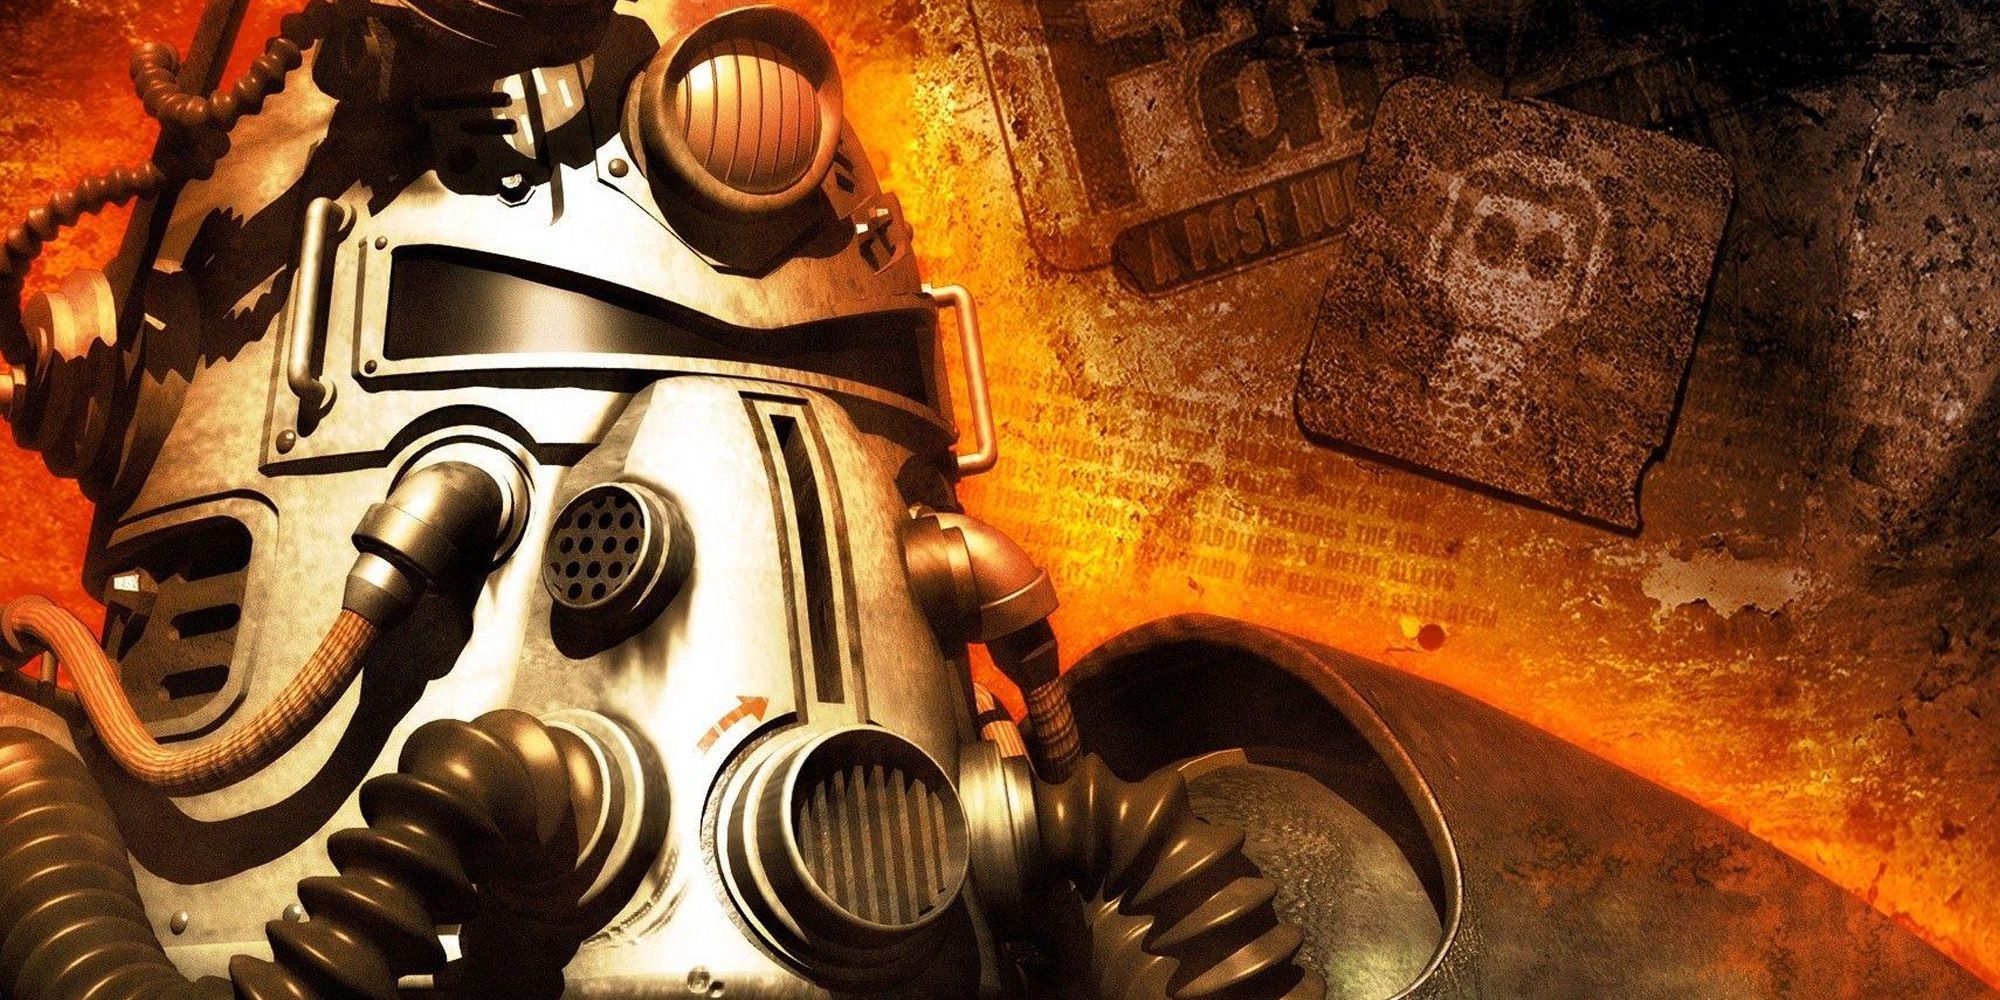 A Wallpaper Version of Fallout 1's Game Cover Art